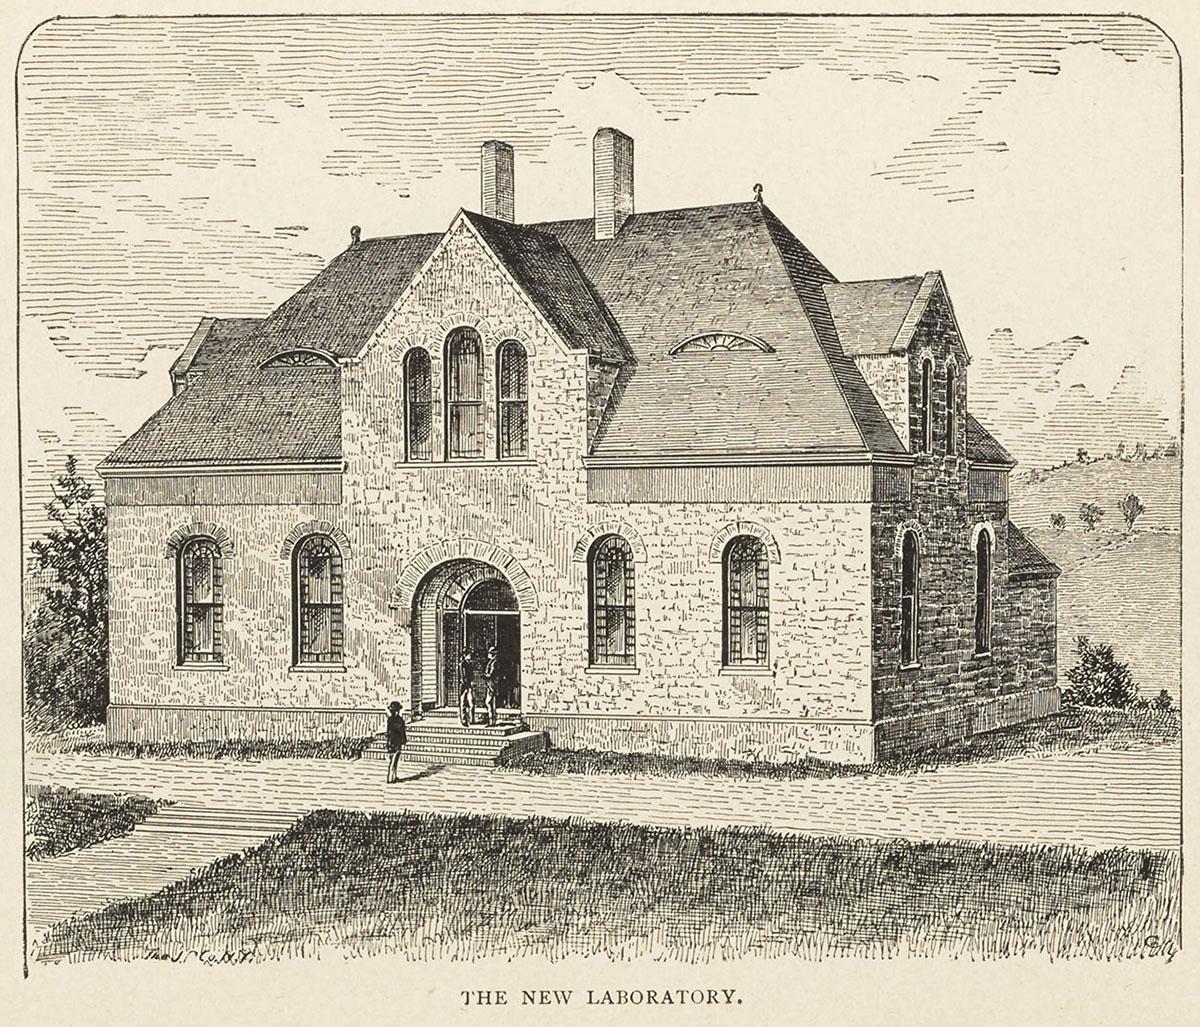 The Chemistry Laboratory, now Hascall Hall, in 1886.